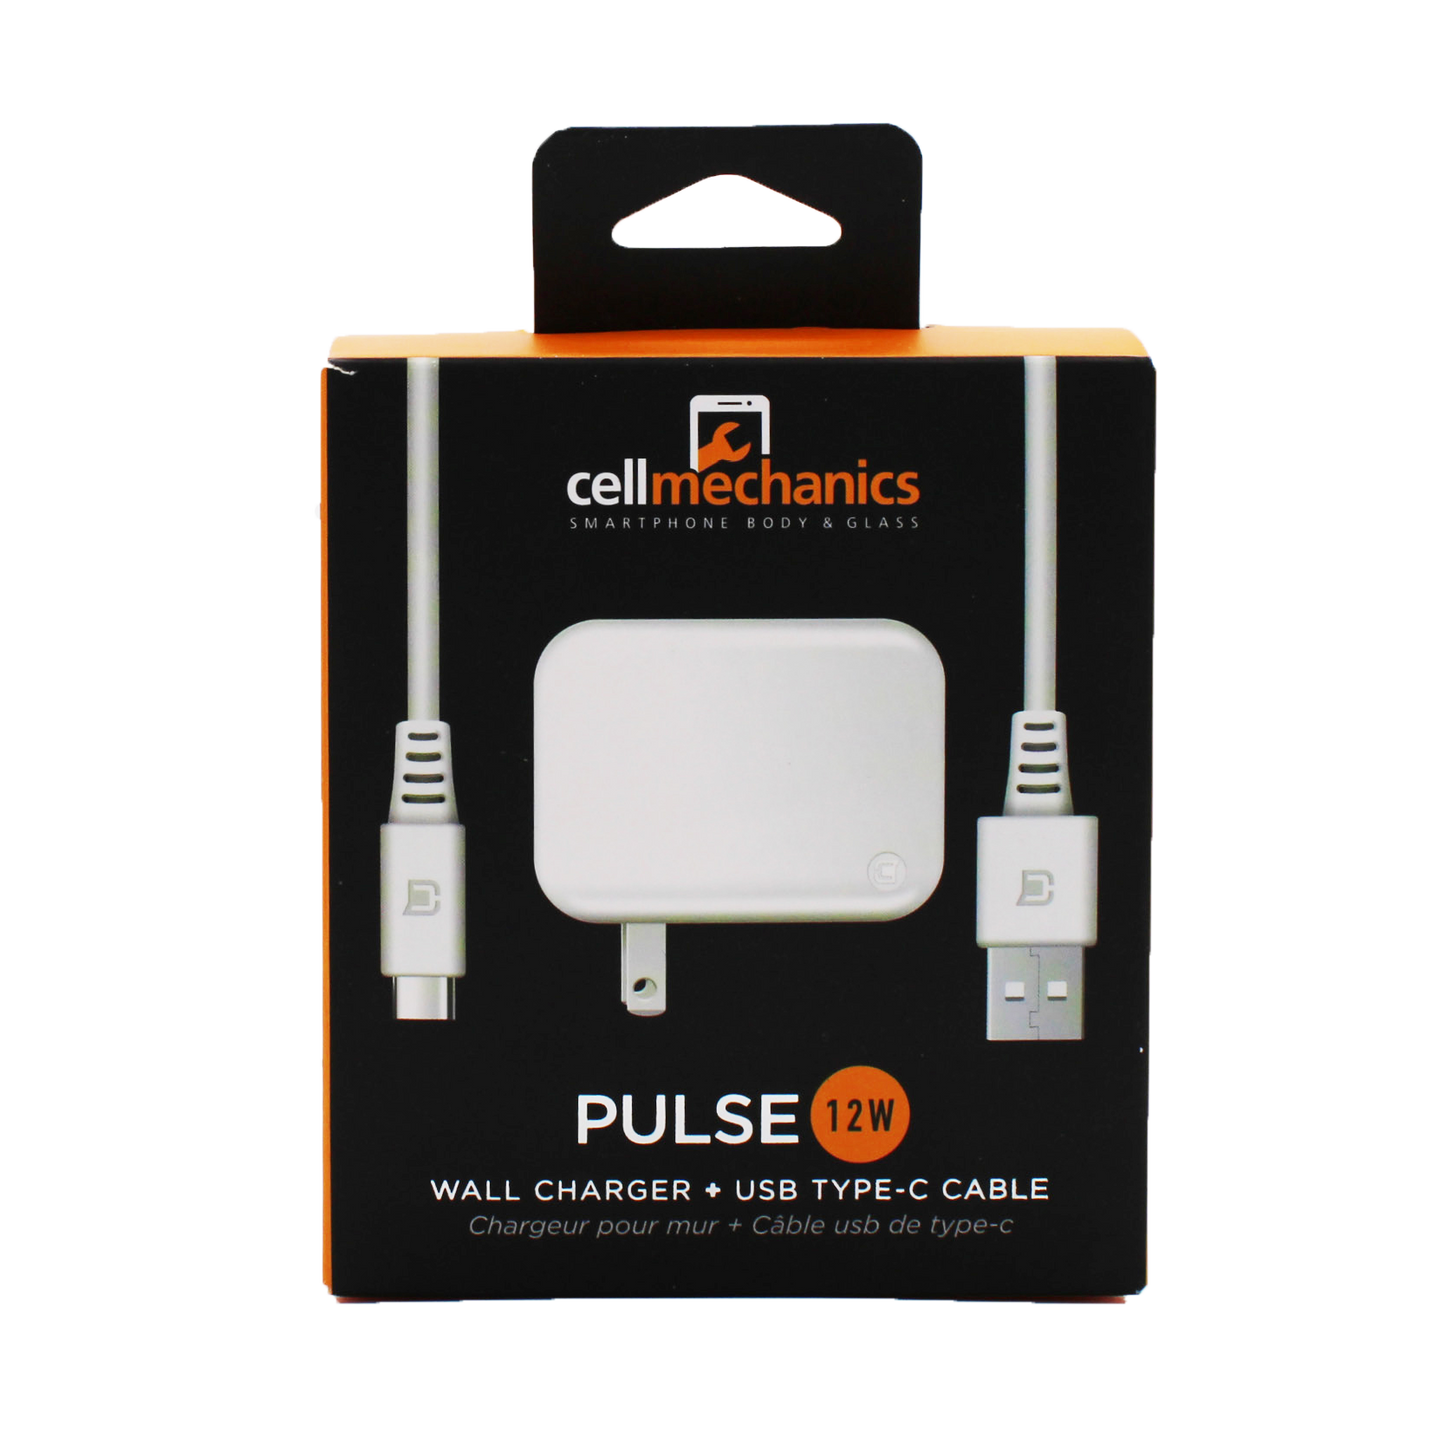 Pulse Wall Charger & Cable - 12W